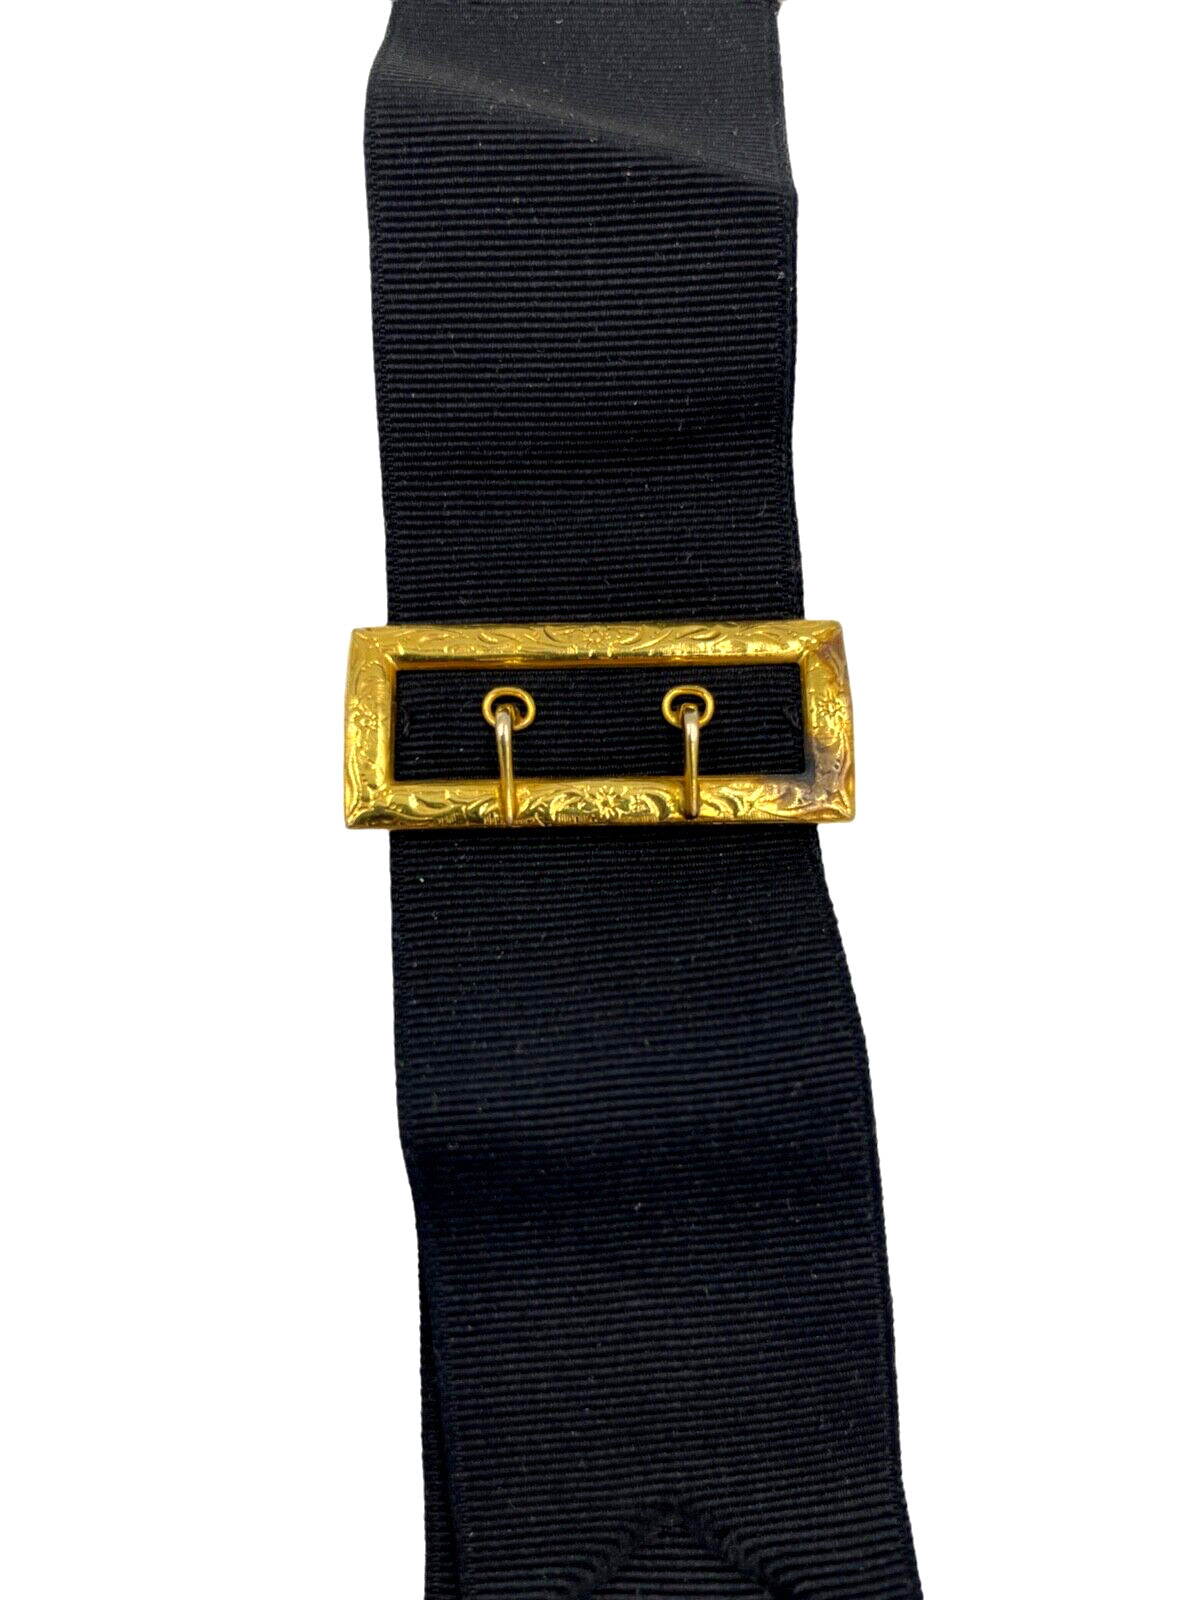 Antique 10K GOLD & BLACK SILK RIBBON WATCH CHAIN FOB Mourning